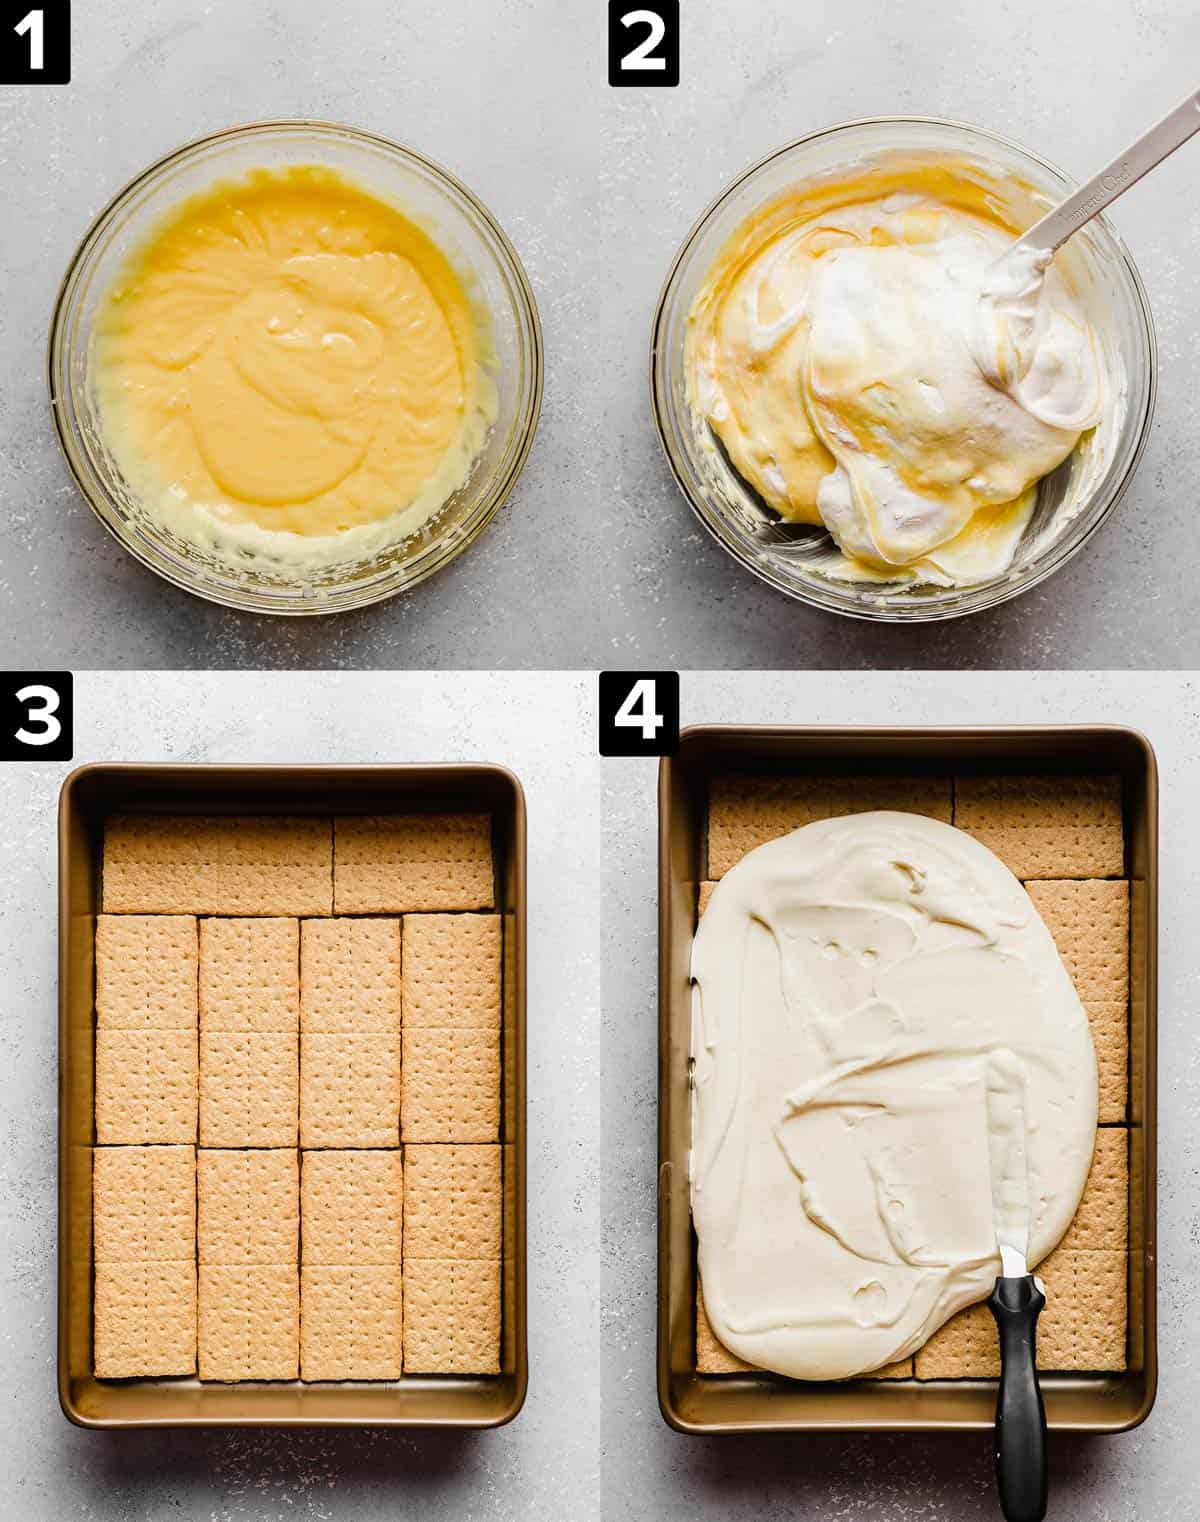 Four images showing how to make Chocolate Eclair Cake using instant pudding and graham crackers.